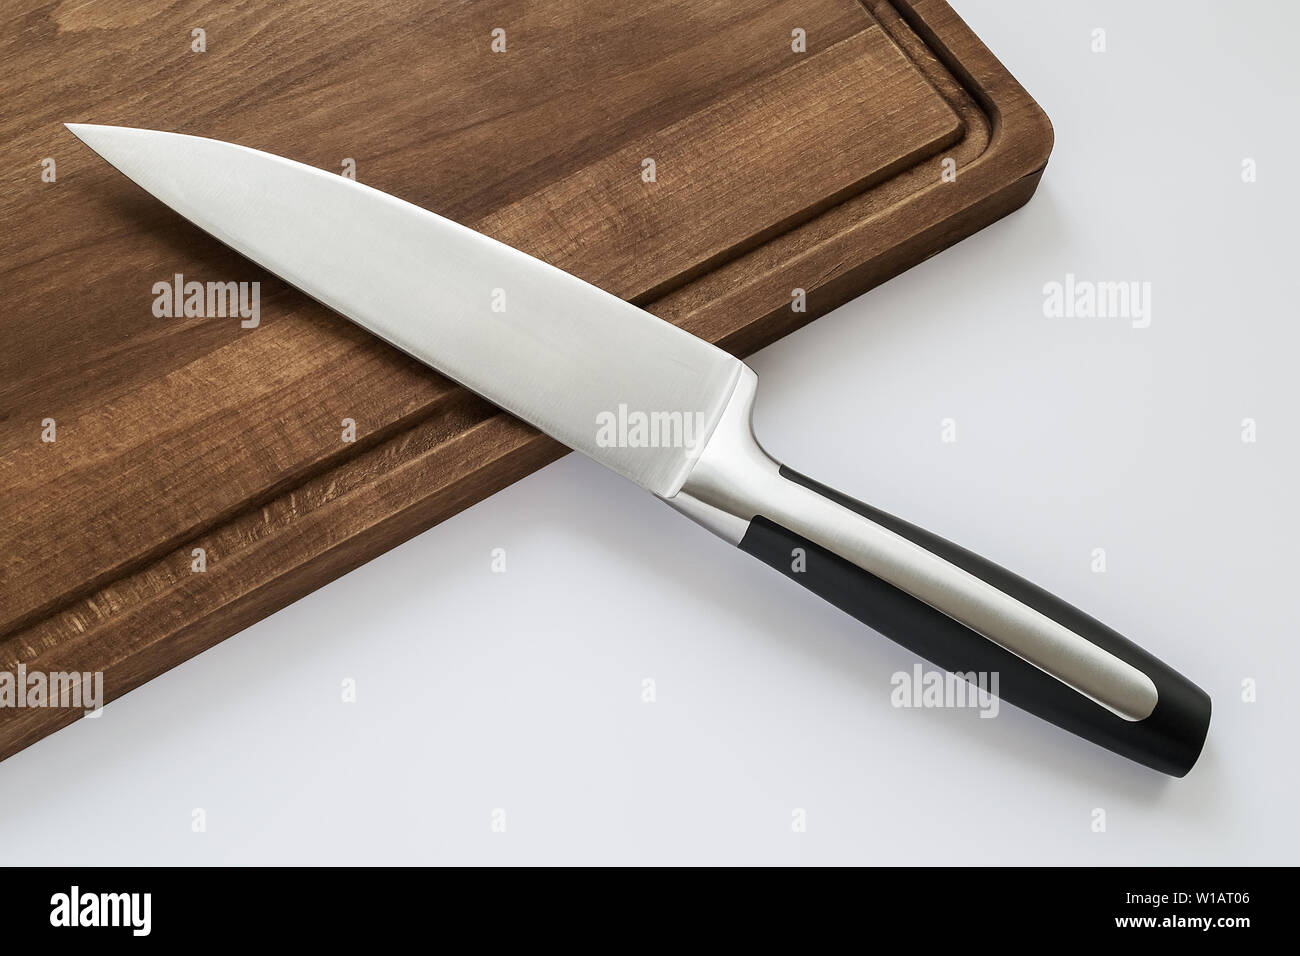 Professional chef knife, peeling knife and sharpening steel on wood cutting  board over a kitchen table. Chef working tools. Modern kitchen utensils  Stock Photo - Alamy